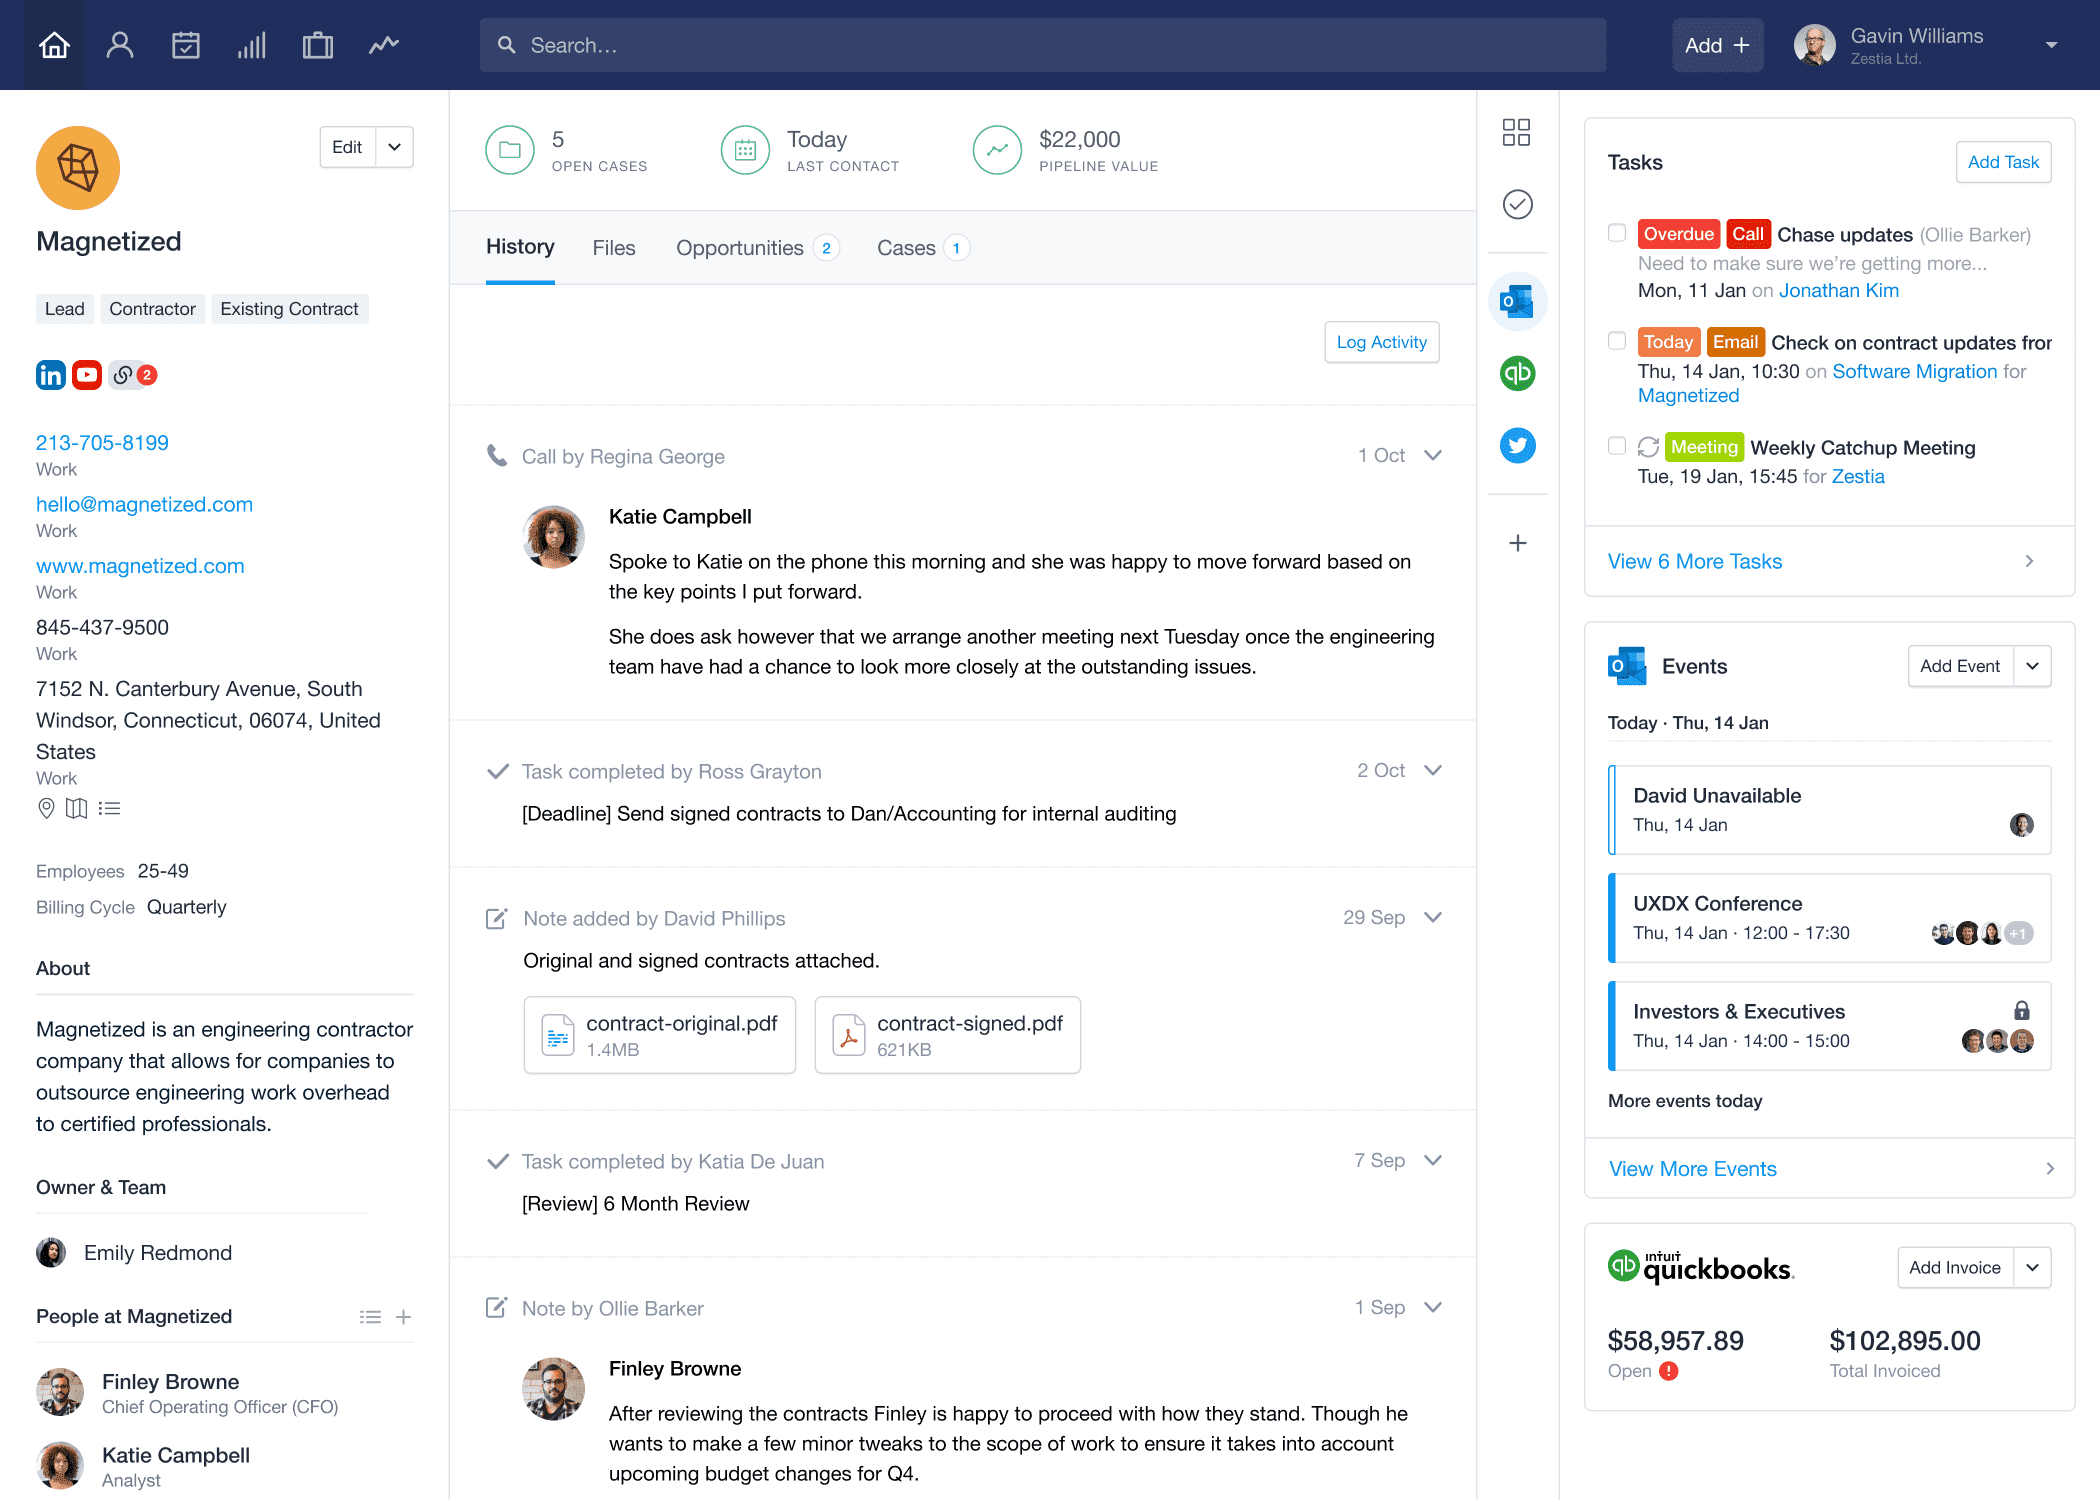 minified view of Outlook Calendar sidebar in Capsule with upcoming events